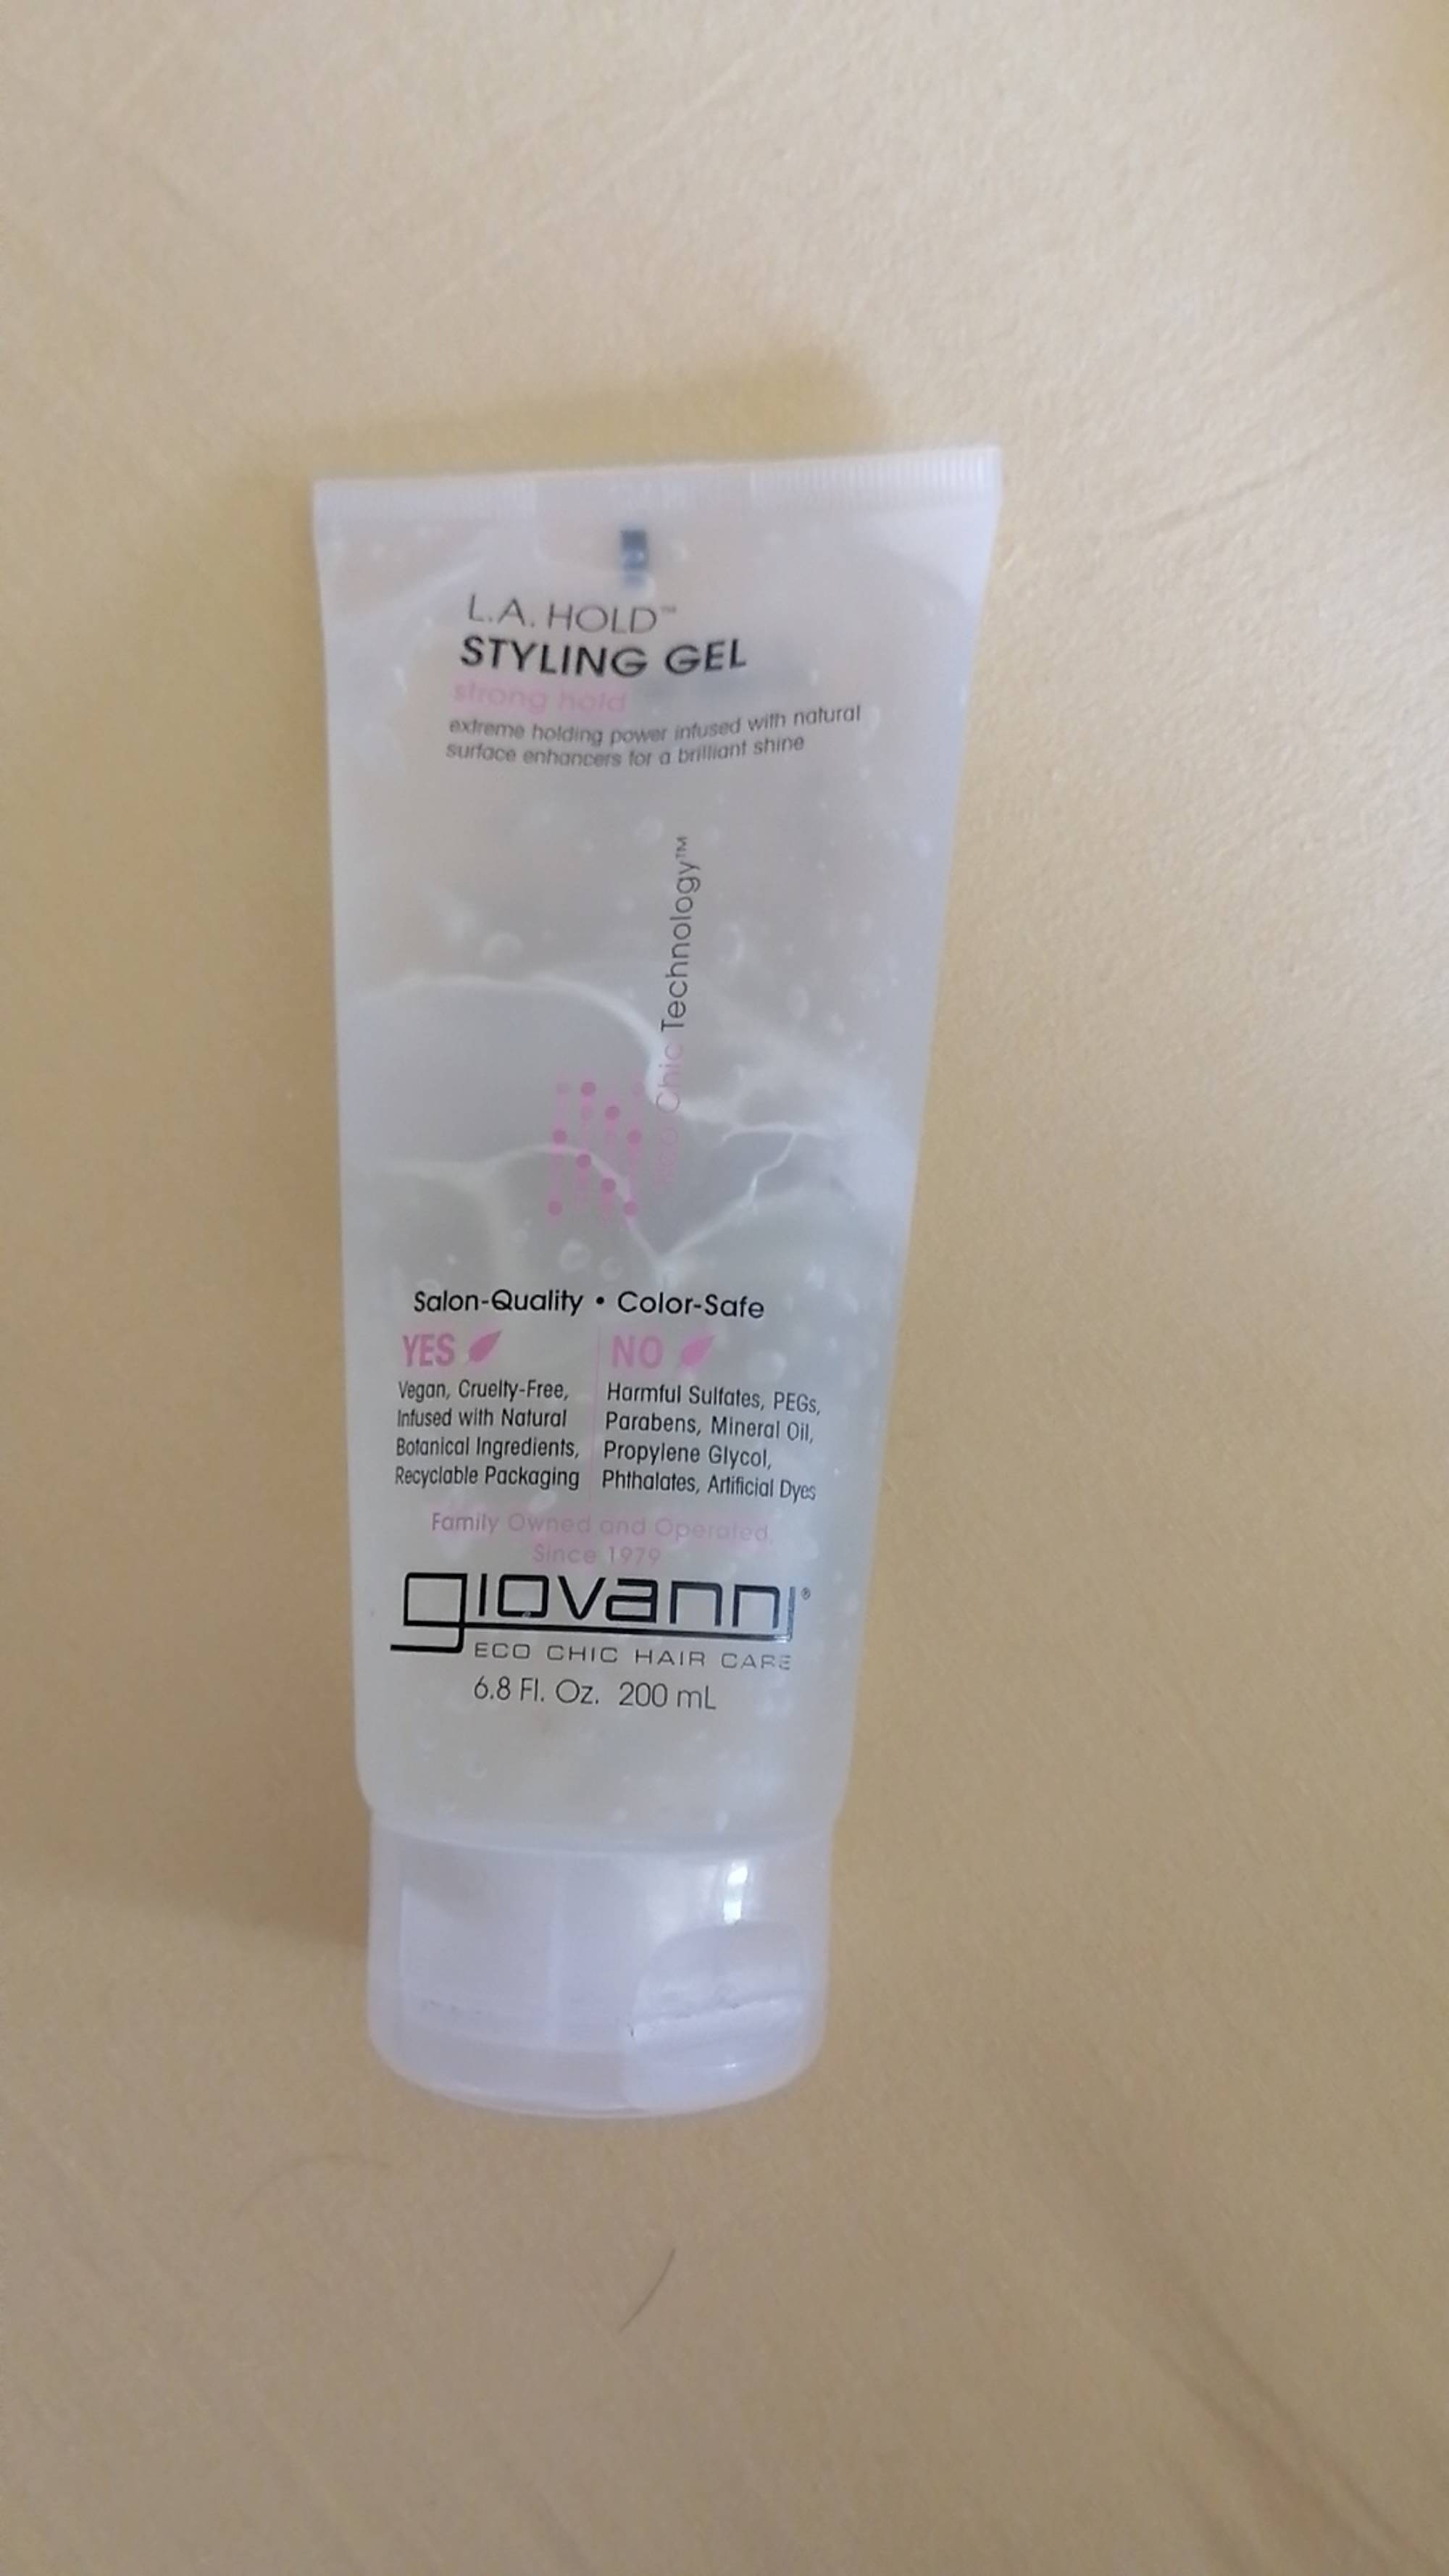 GIOVANNI - L.A. Hold - Styling gel